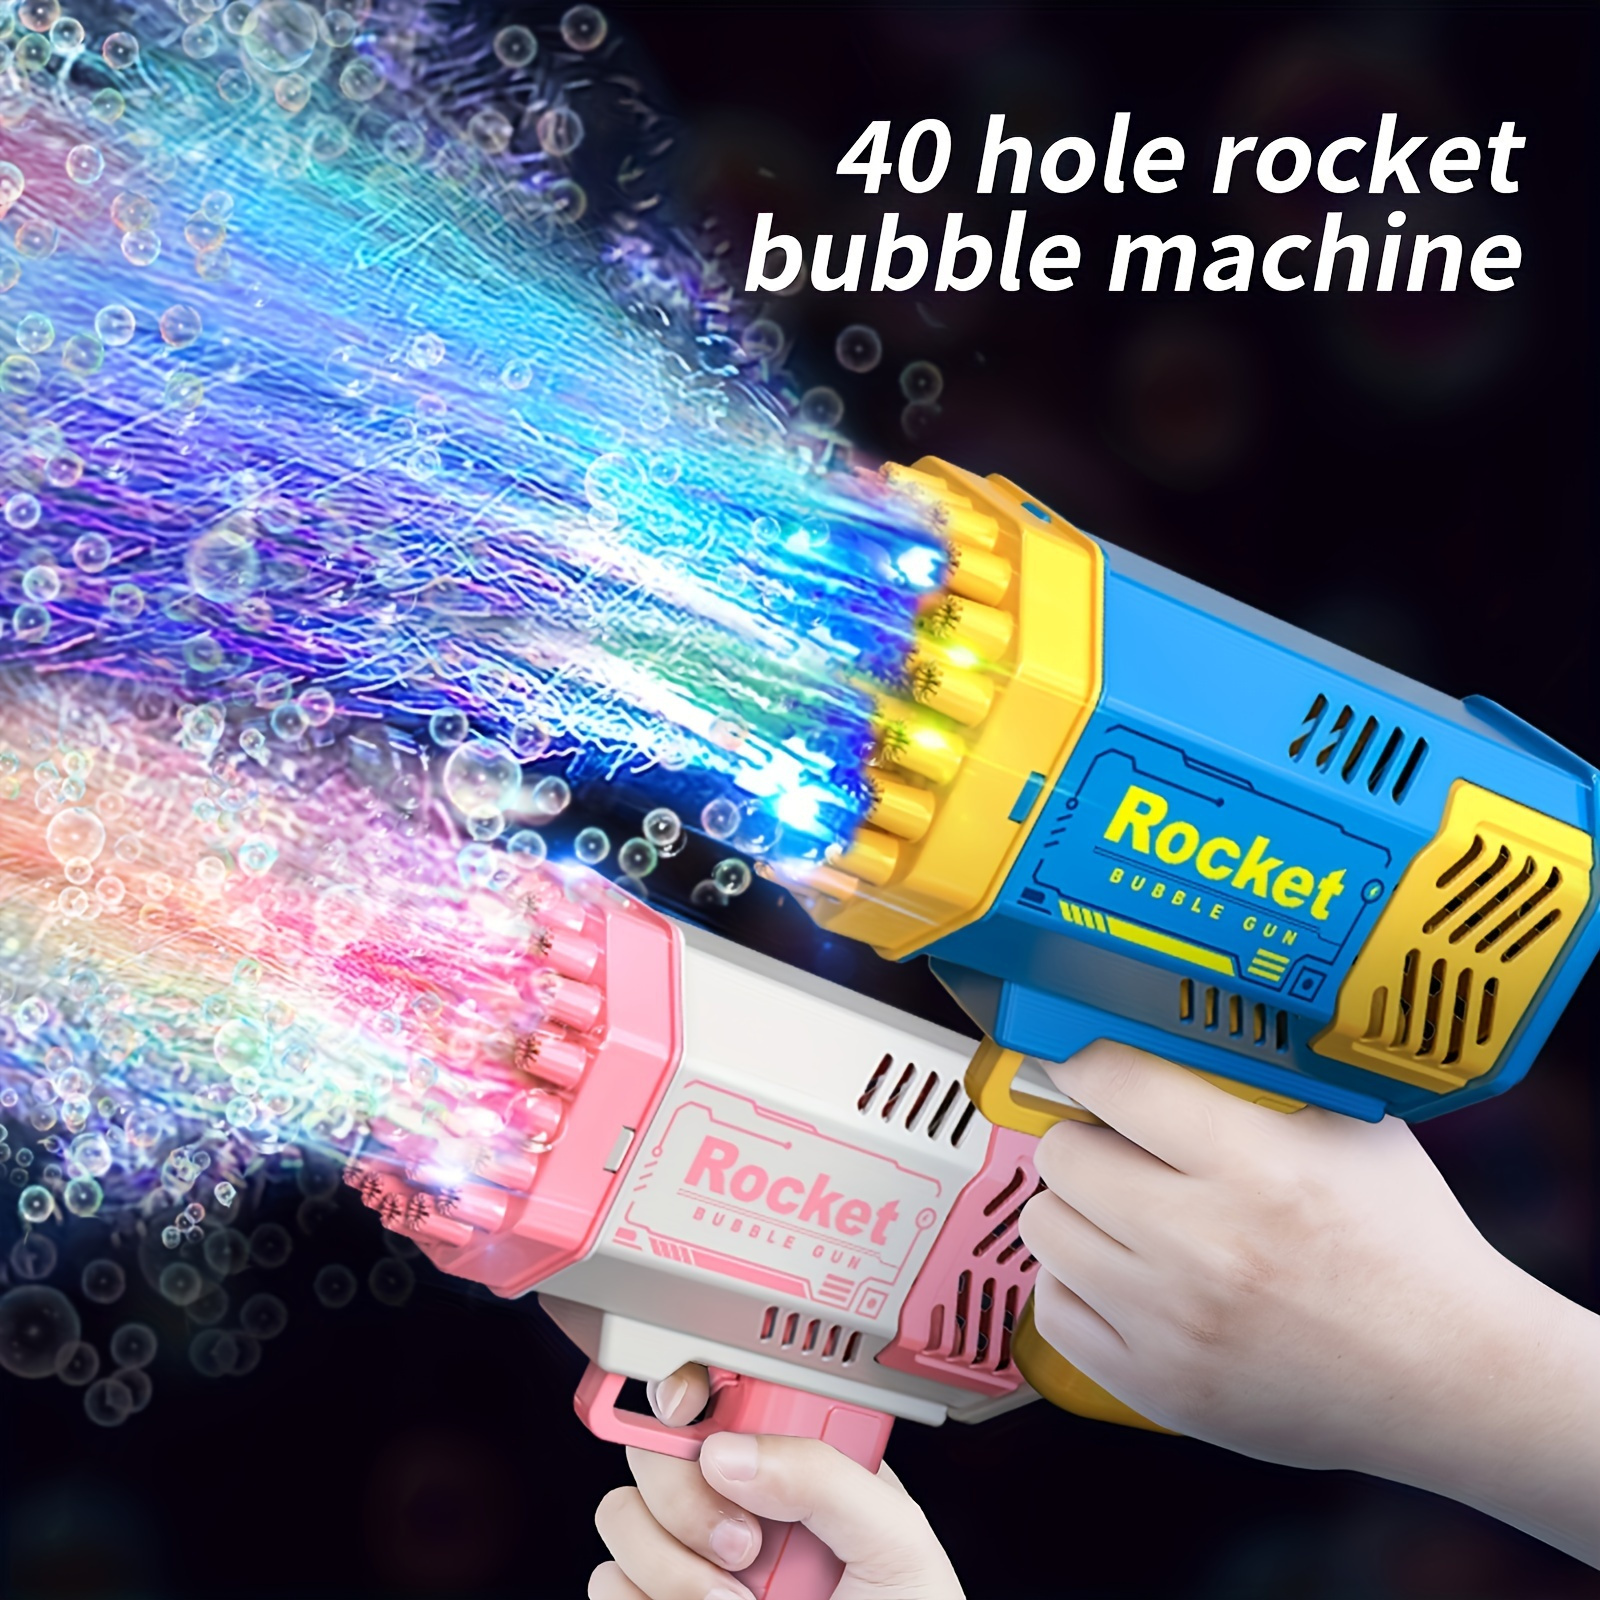 Electric Dinosaur Bubble Machine With 44 Holes Fun Water Table